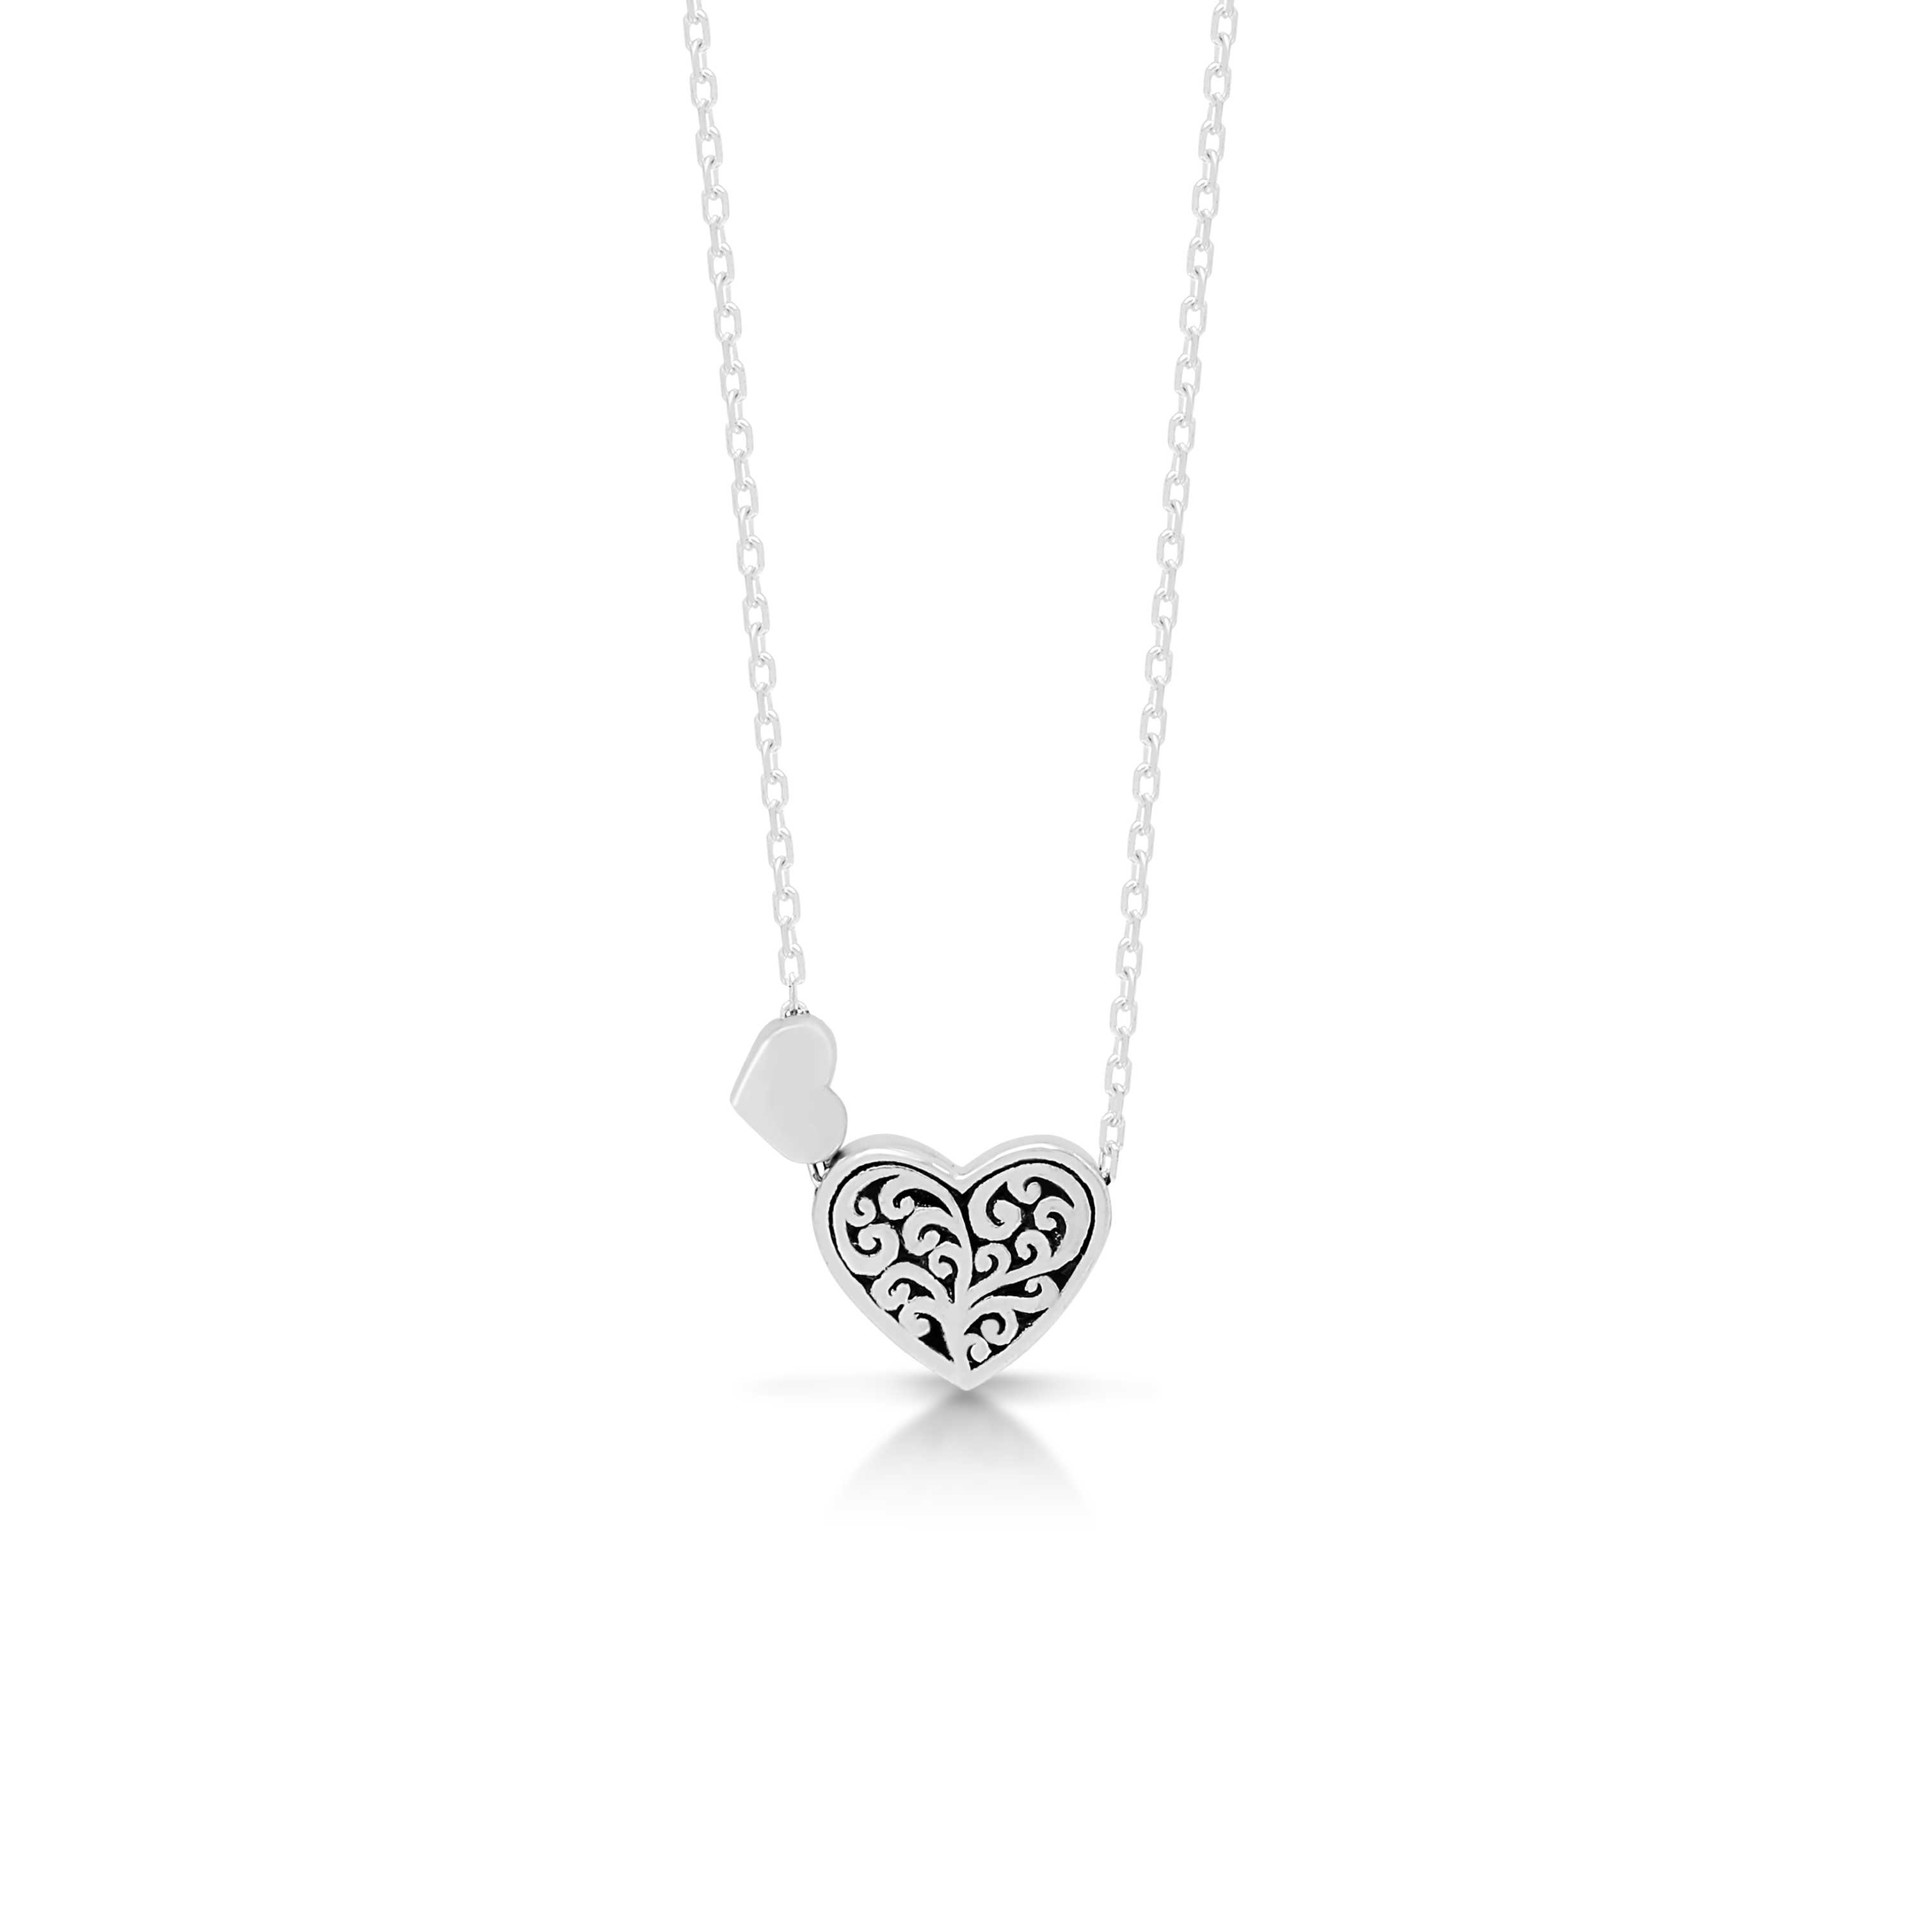 9767 Hand Carved Sterling Silver Heart Pendant with Sister Heart by Lois Hill